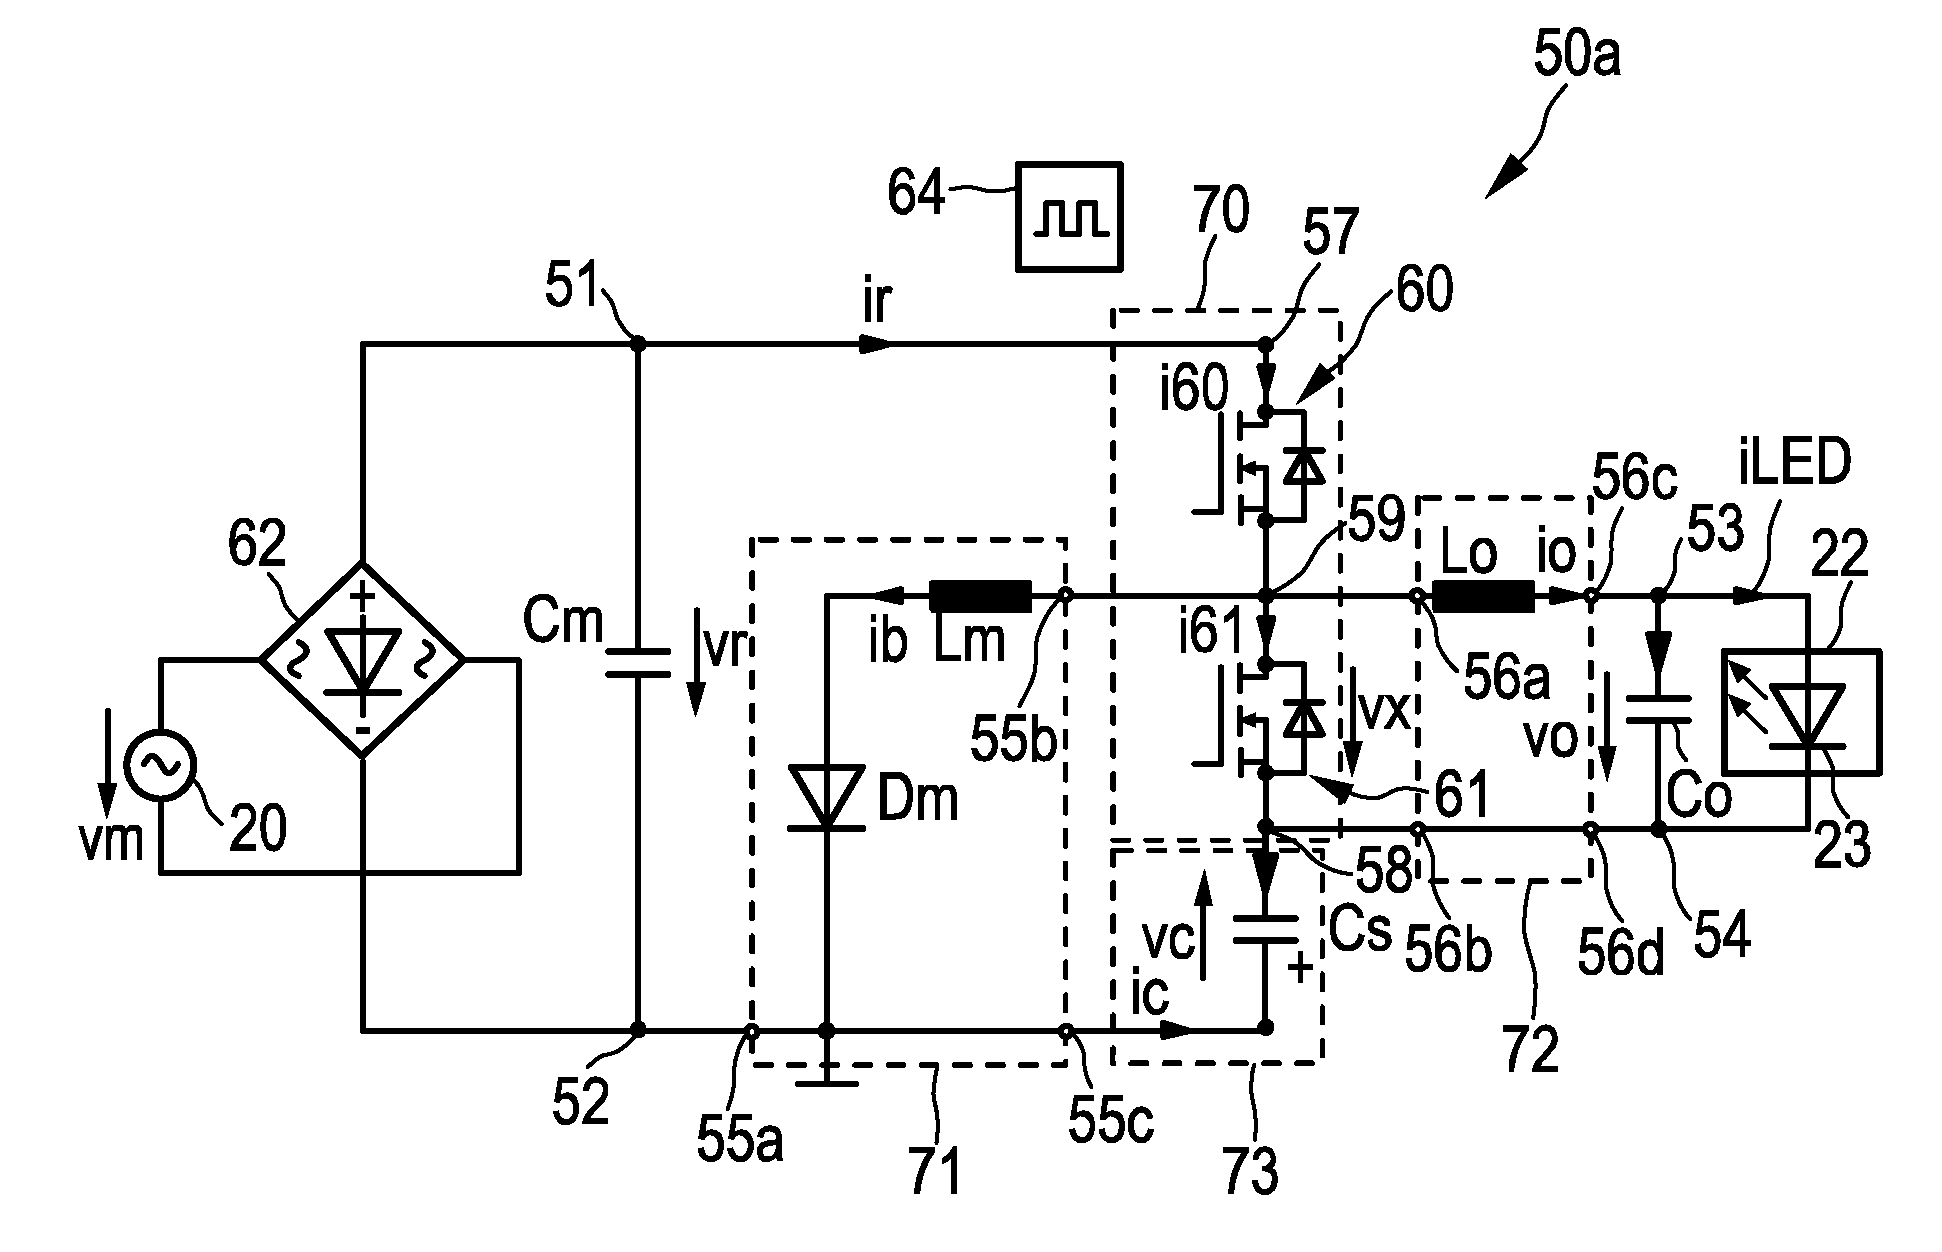 Dc-dc driver device having input and output filters, for driving a load, in particular an LED unit